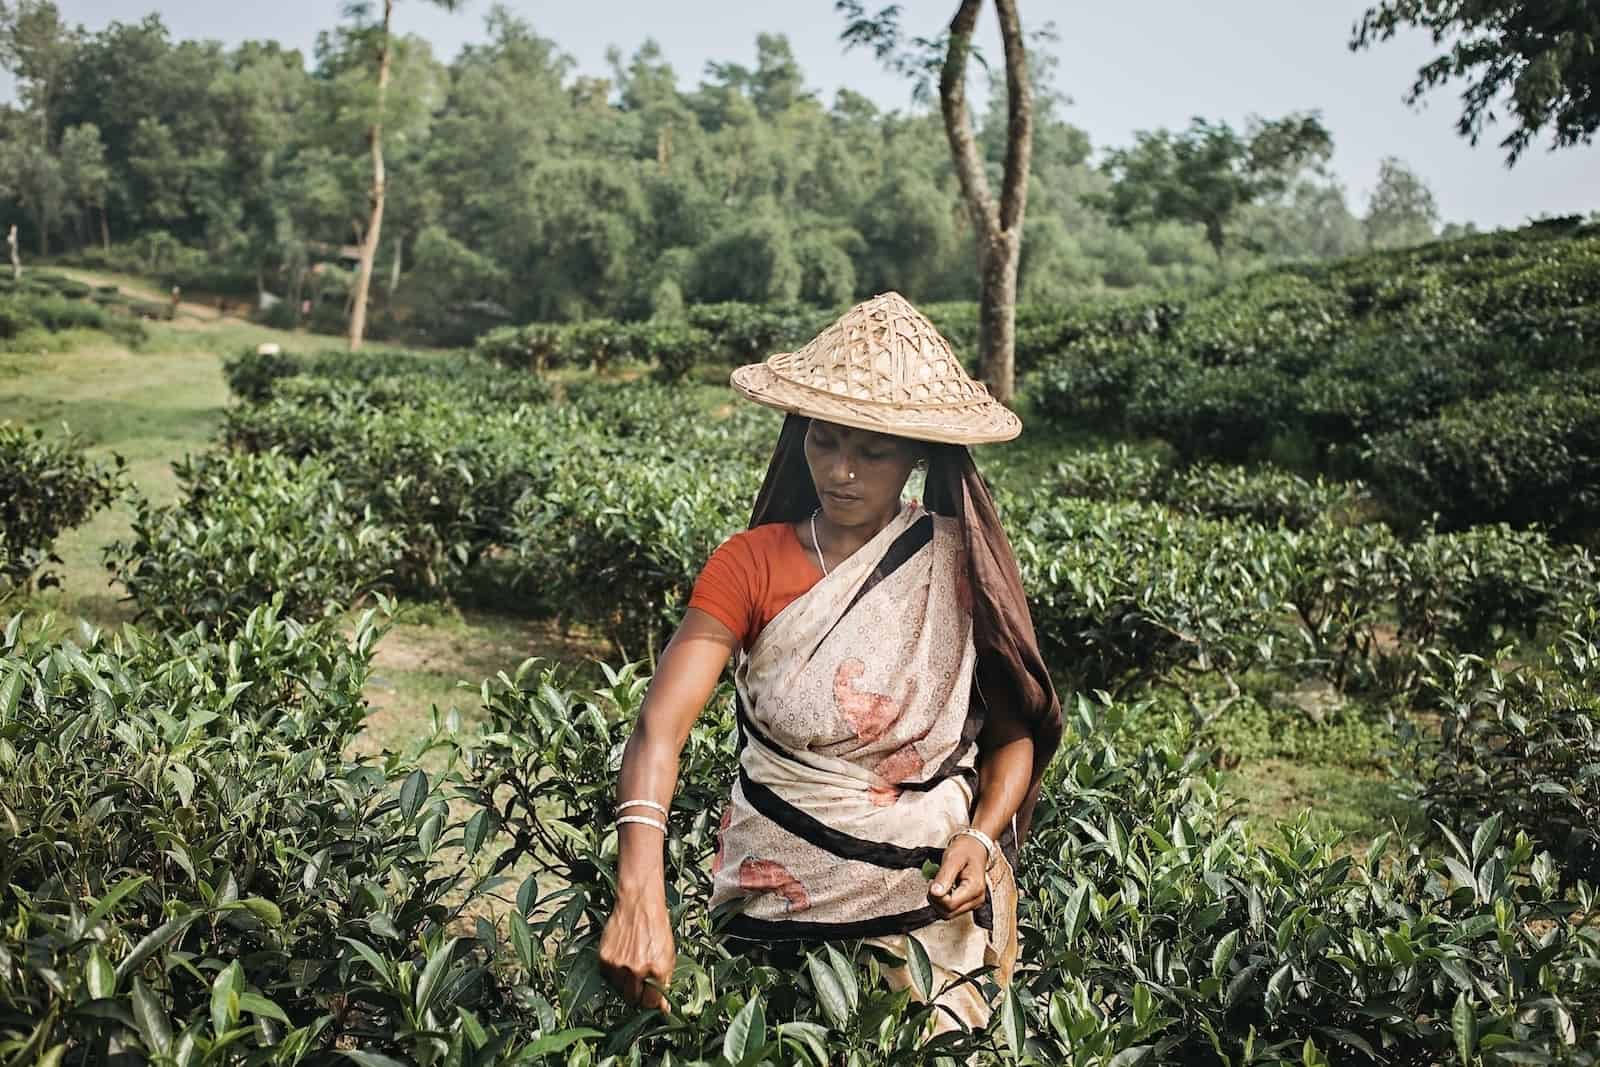 A woman wearing a straw hat, red shirt and tan colored sari stands in a large green field full of bushes, picking leaves to make the most popular drink in the world.